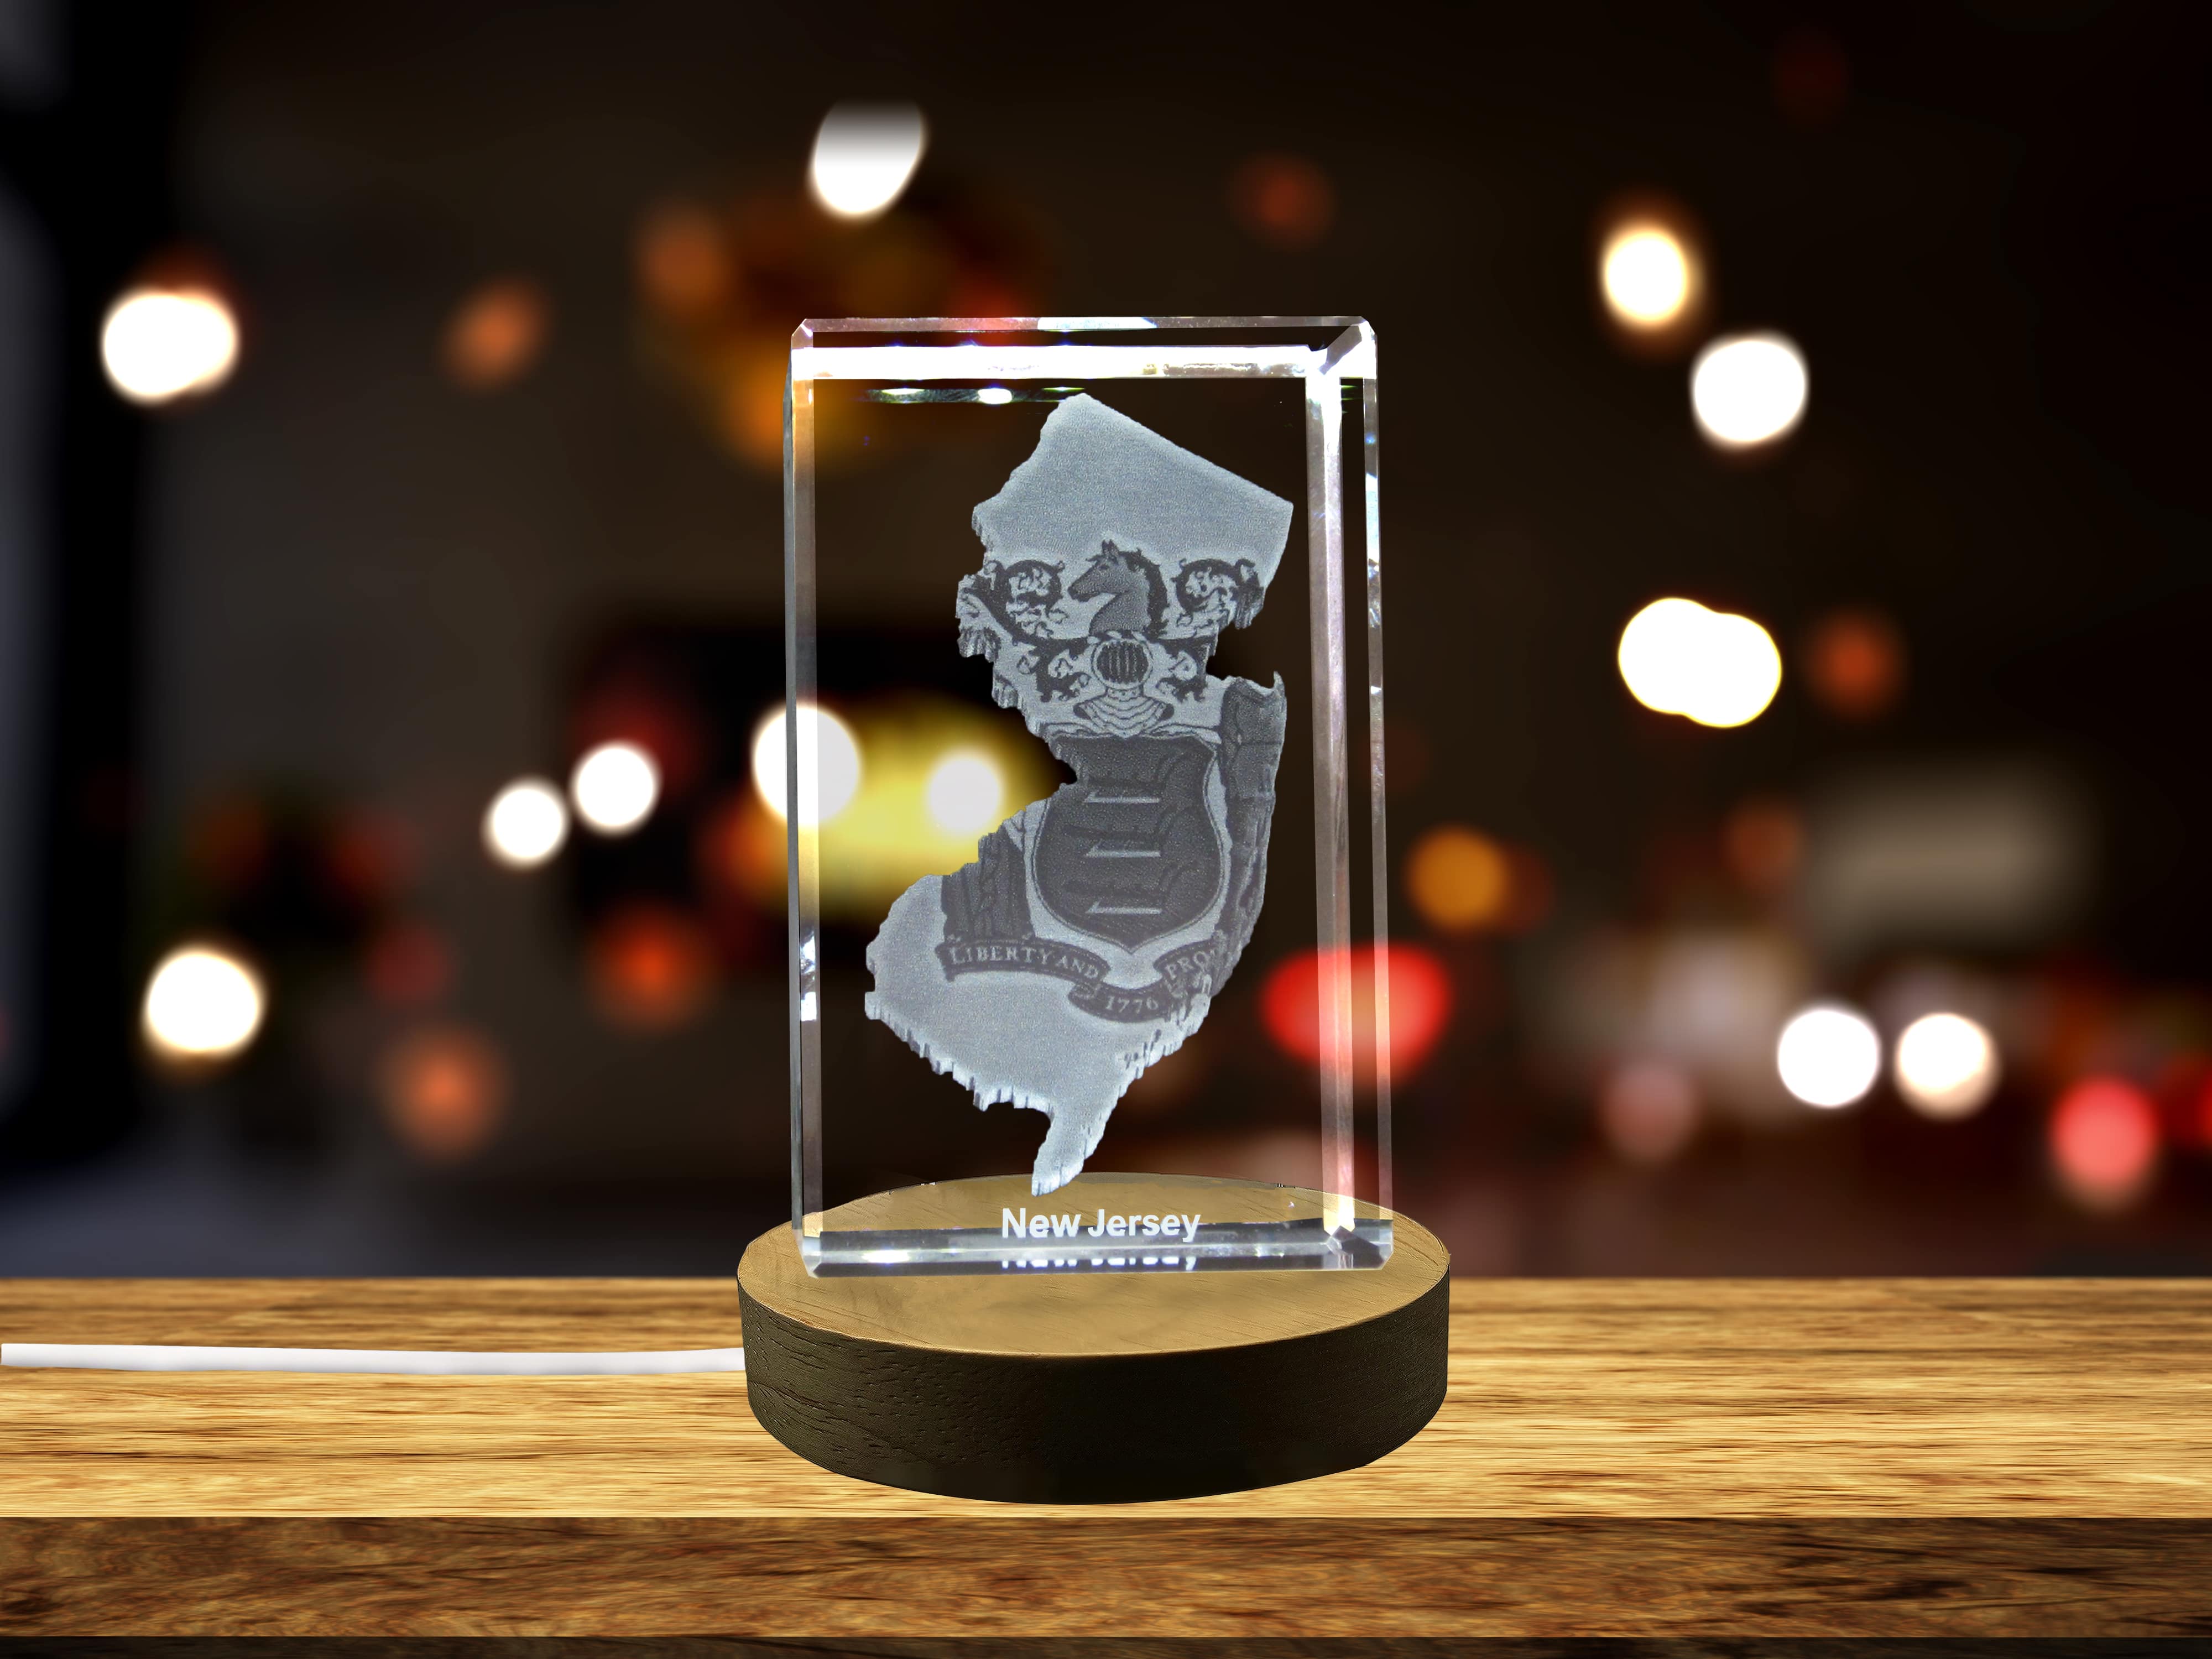 New Jersey 3D Engraved Crystal 3D Engraved Crystal Keepsake/Gift/Decor/Collectible/Souvenir A&B Crystal Collection